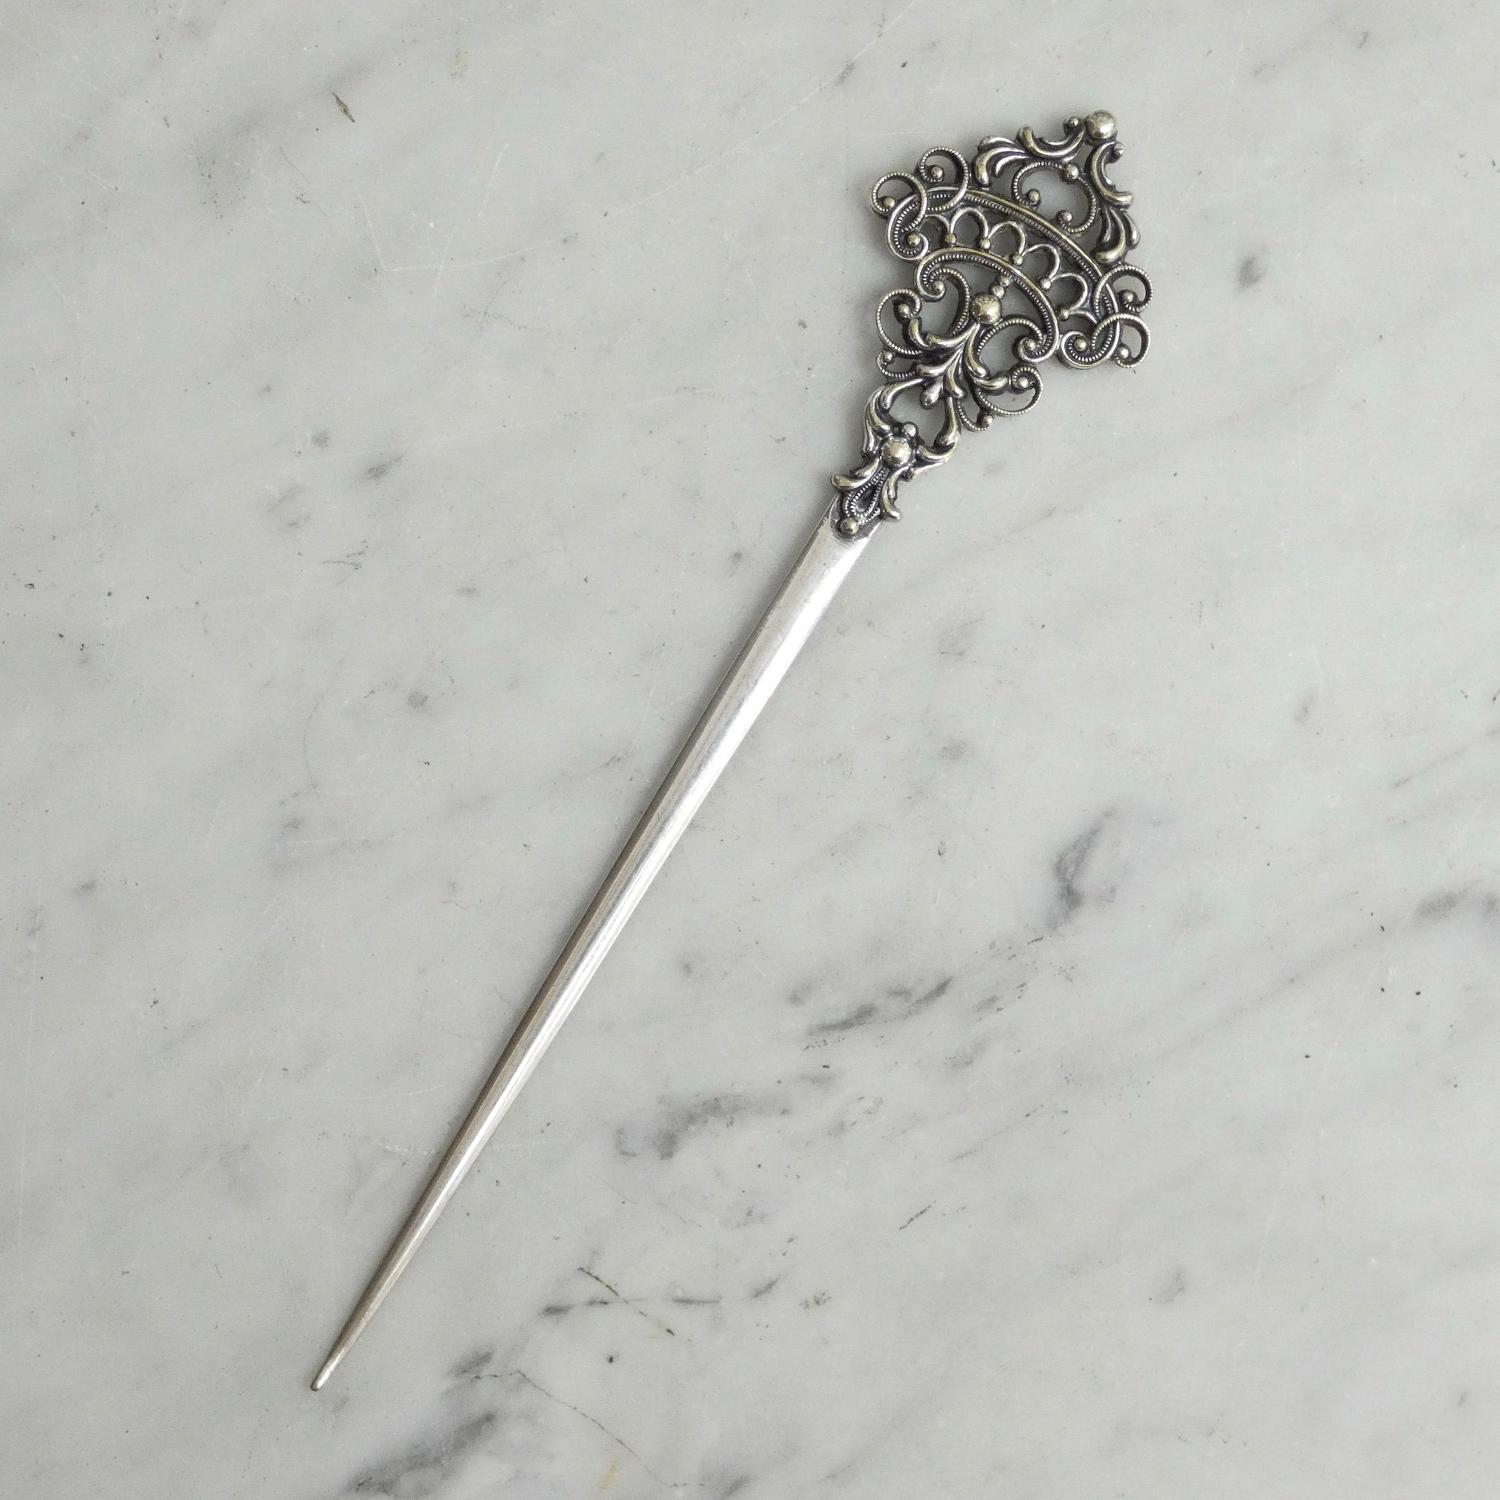 Classical, silver plated skewer